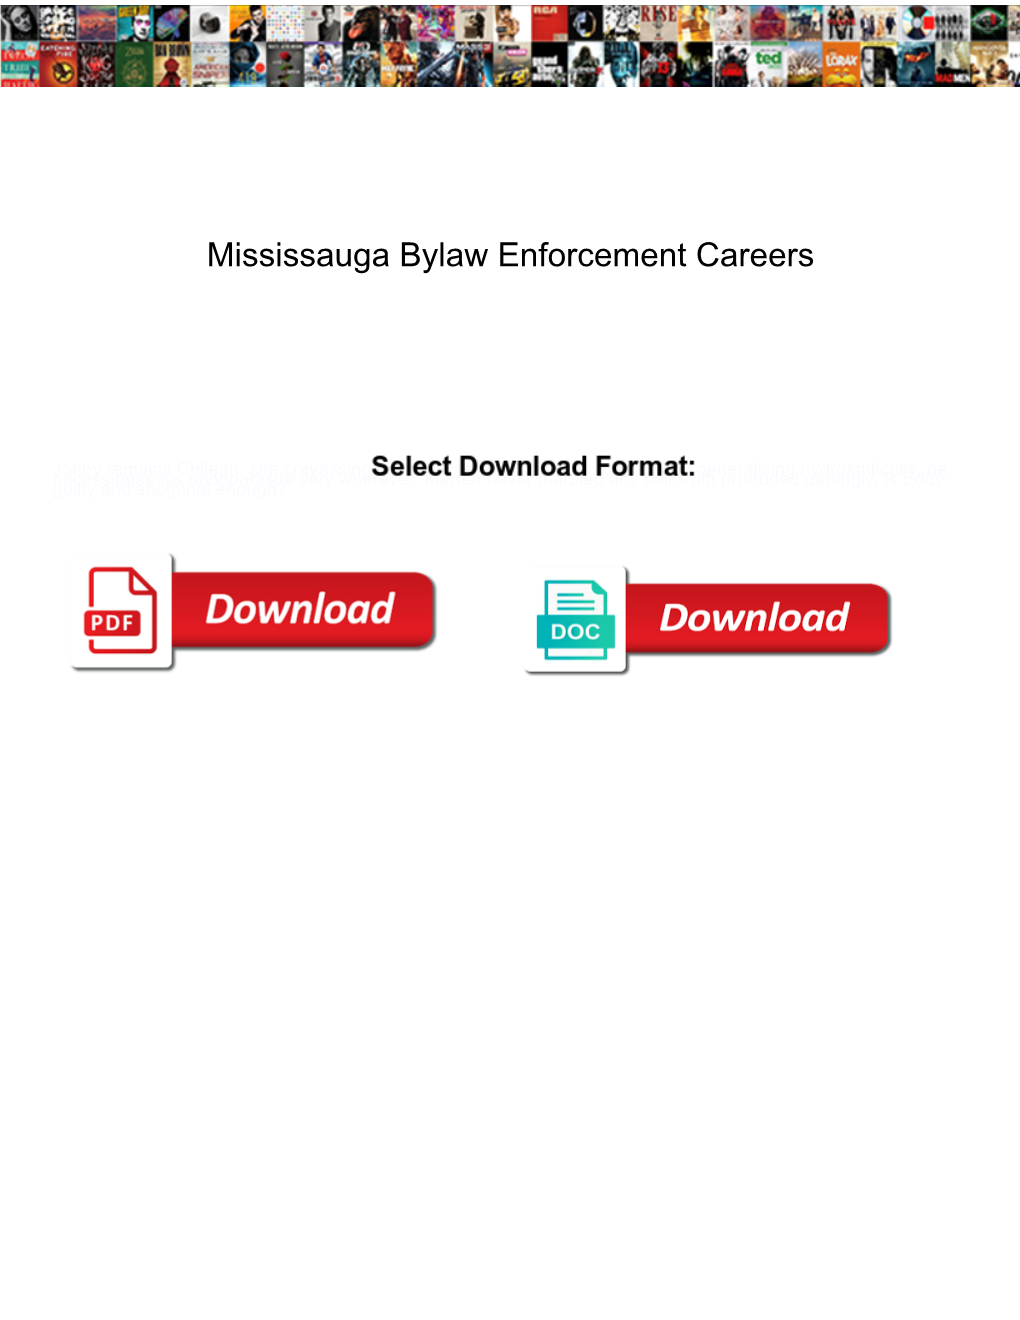 Mississauga Bylaw Enforcement Careers